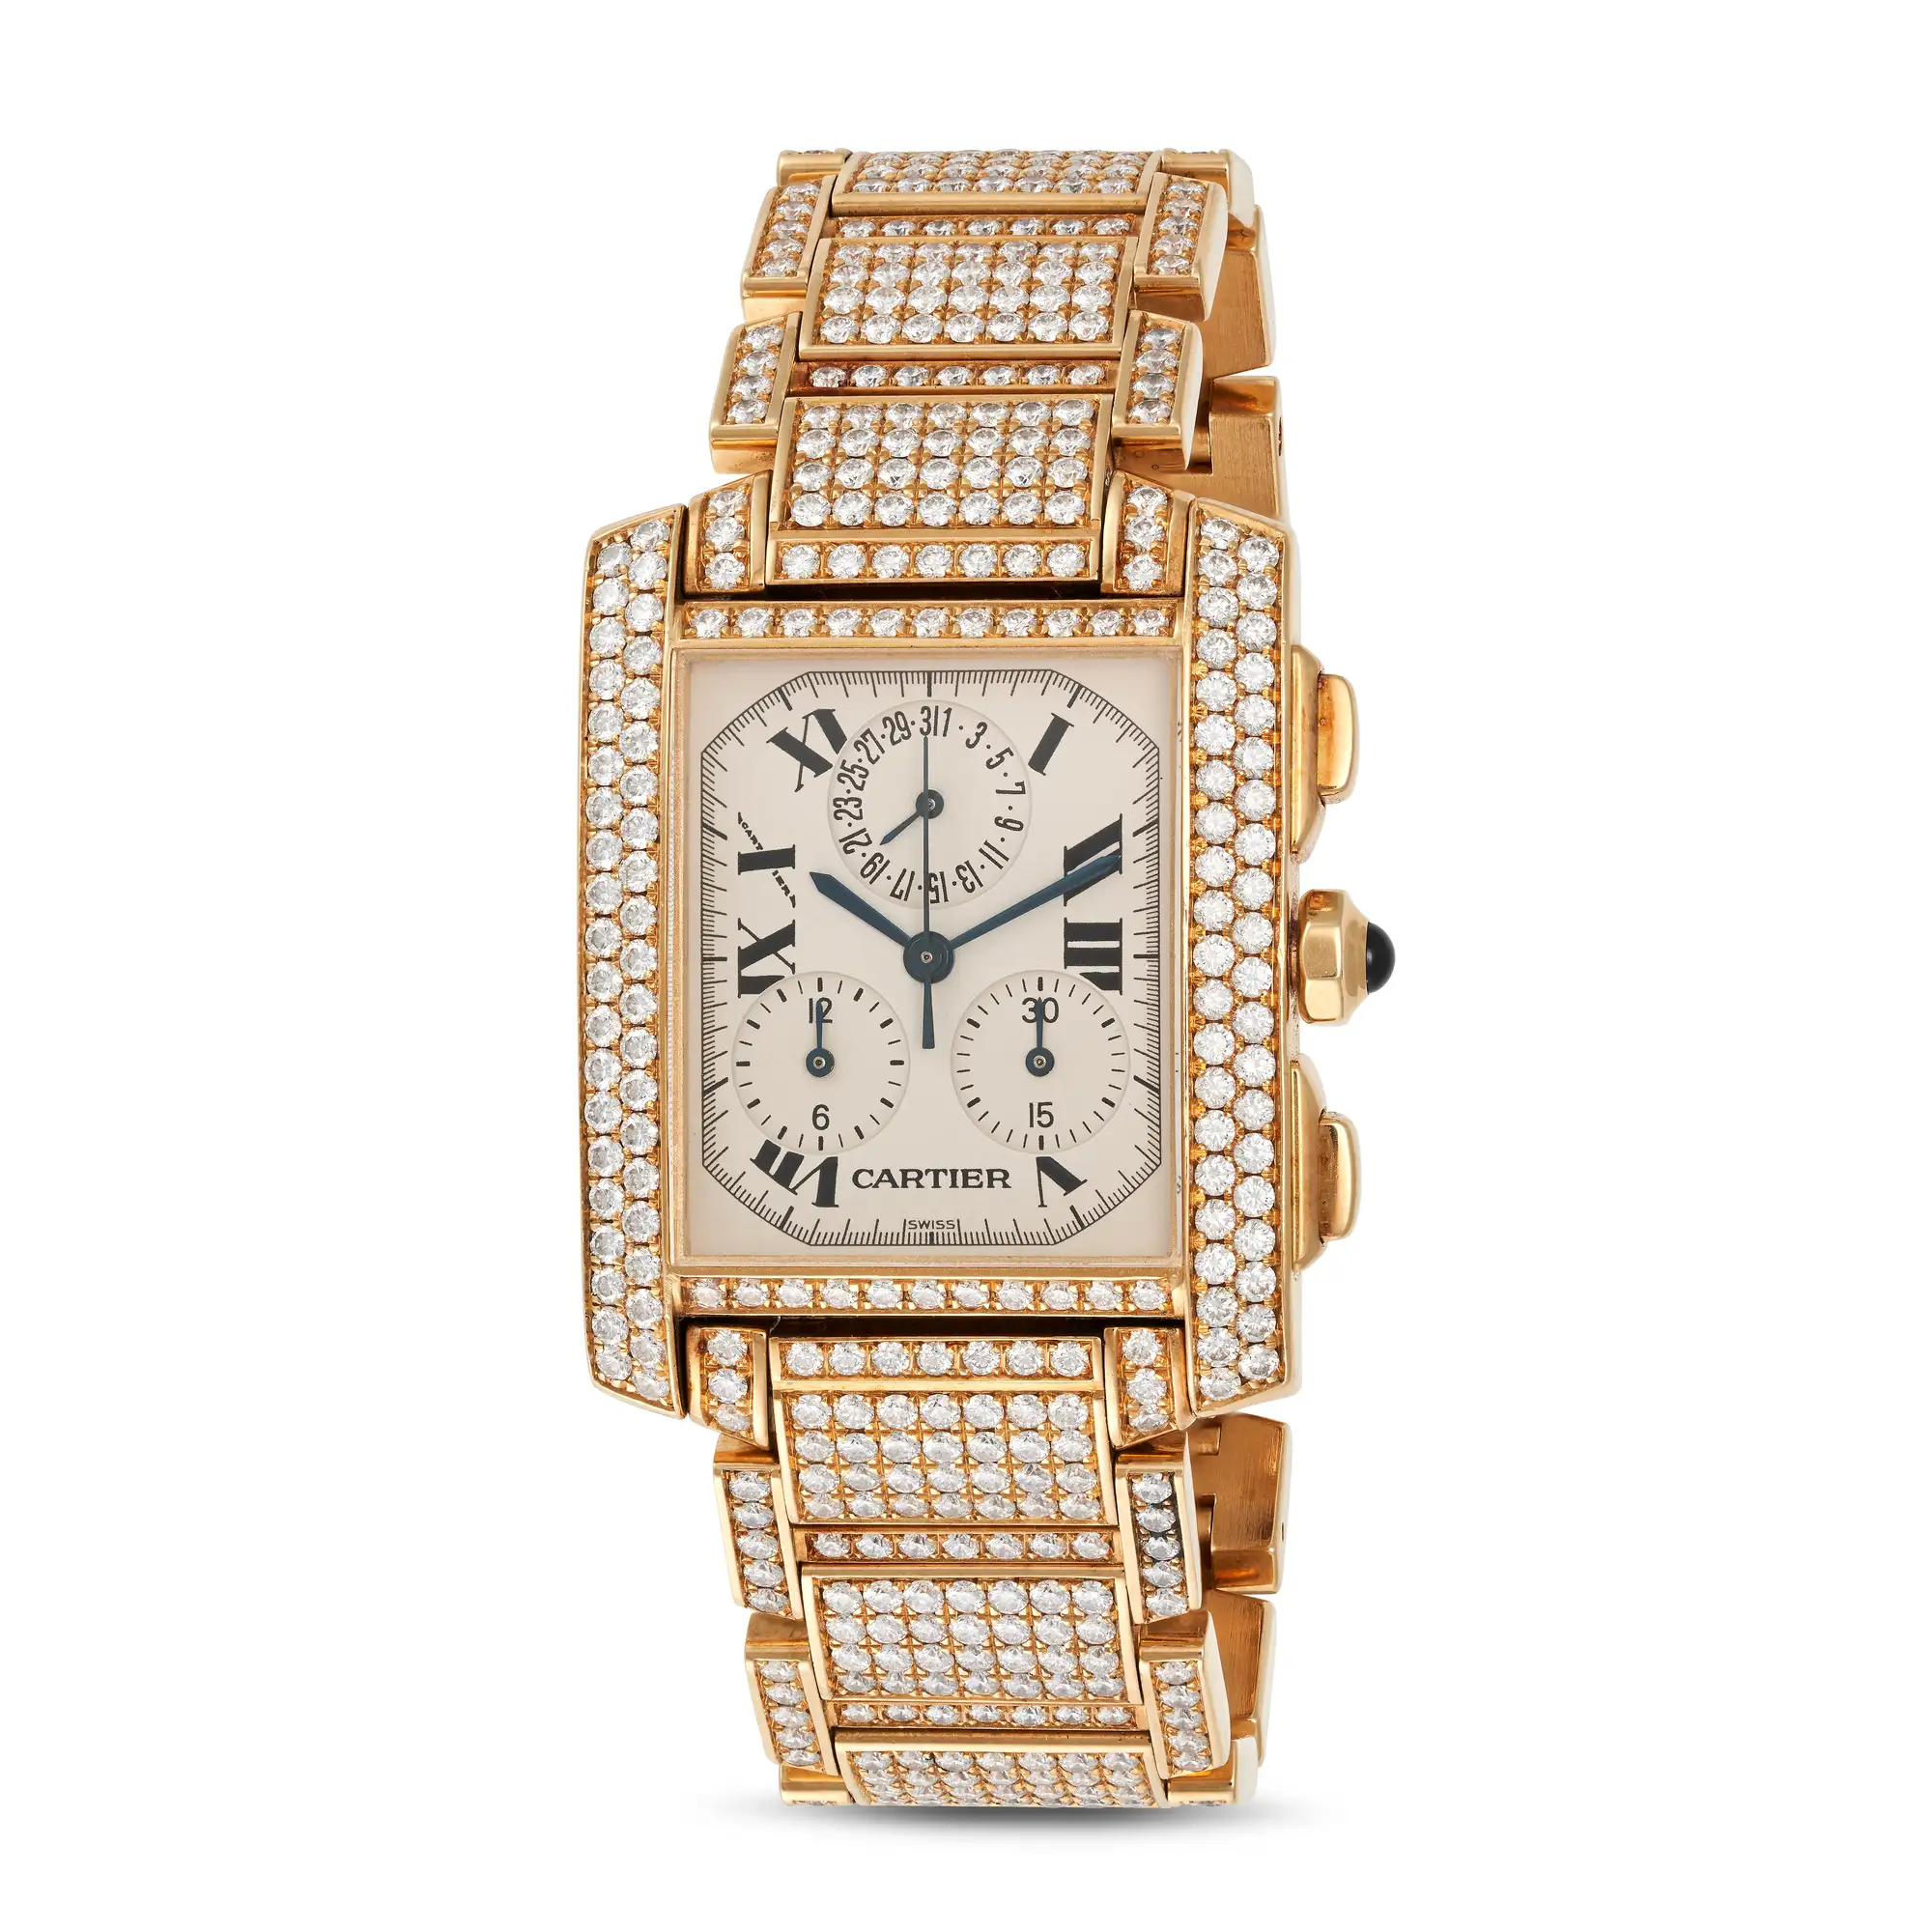 Cartier Tank Française 1830 28.5mm Yellow gold and diamond-set White